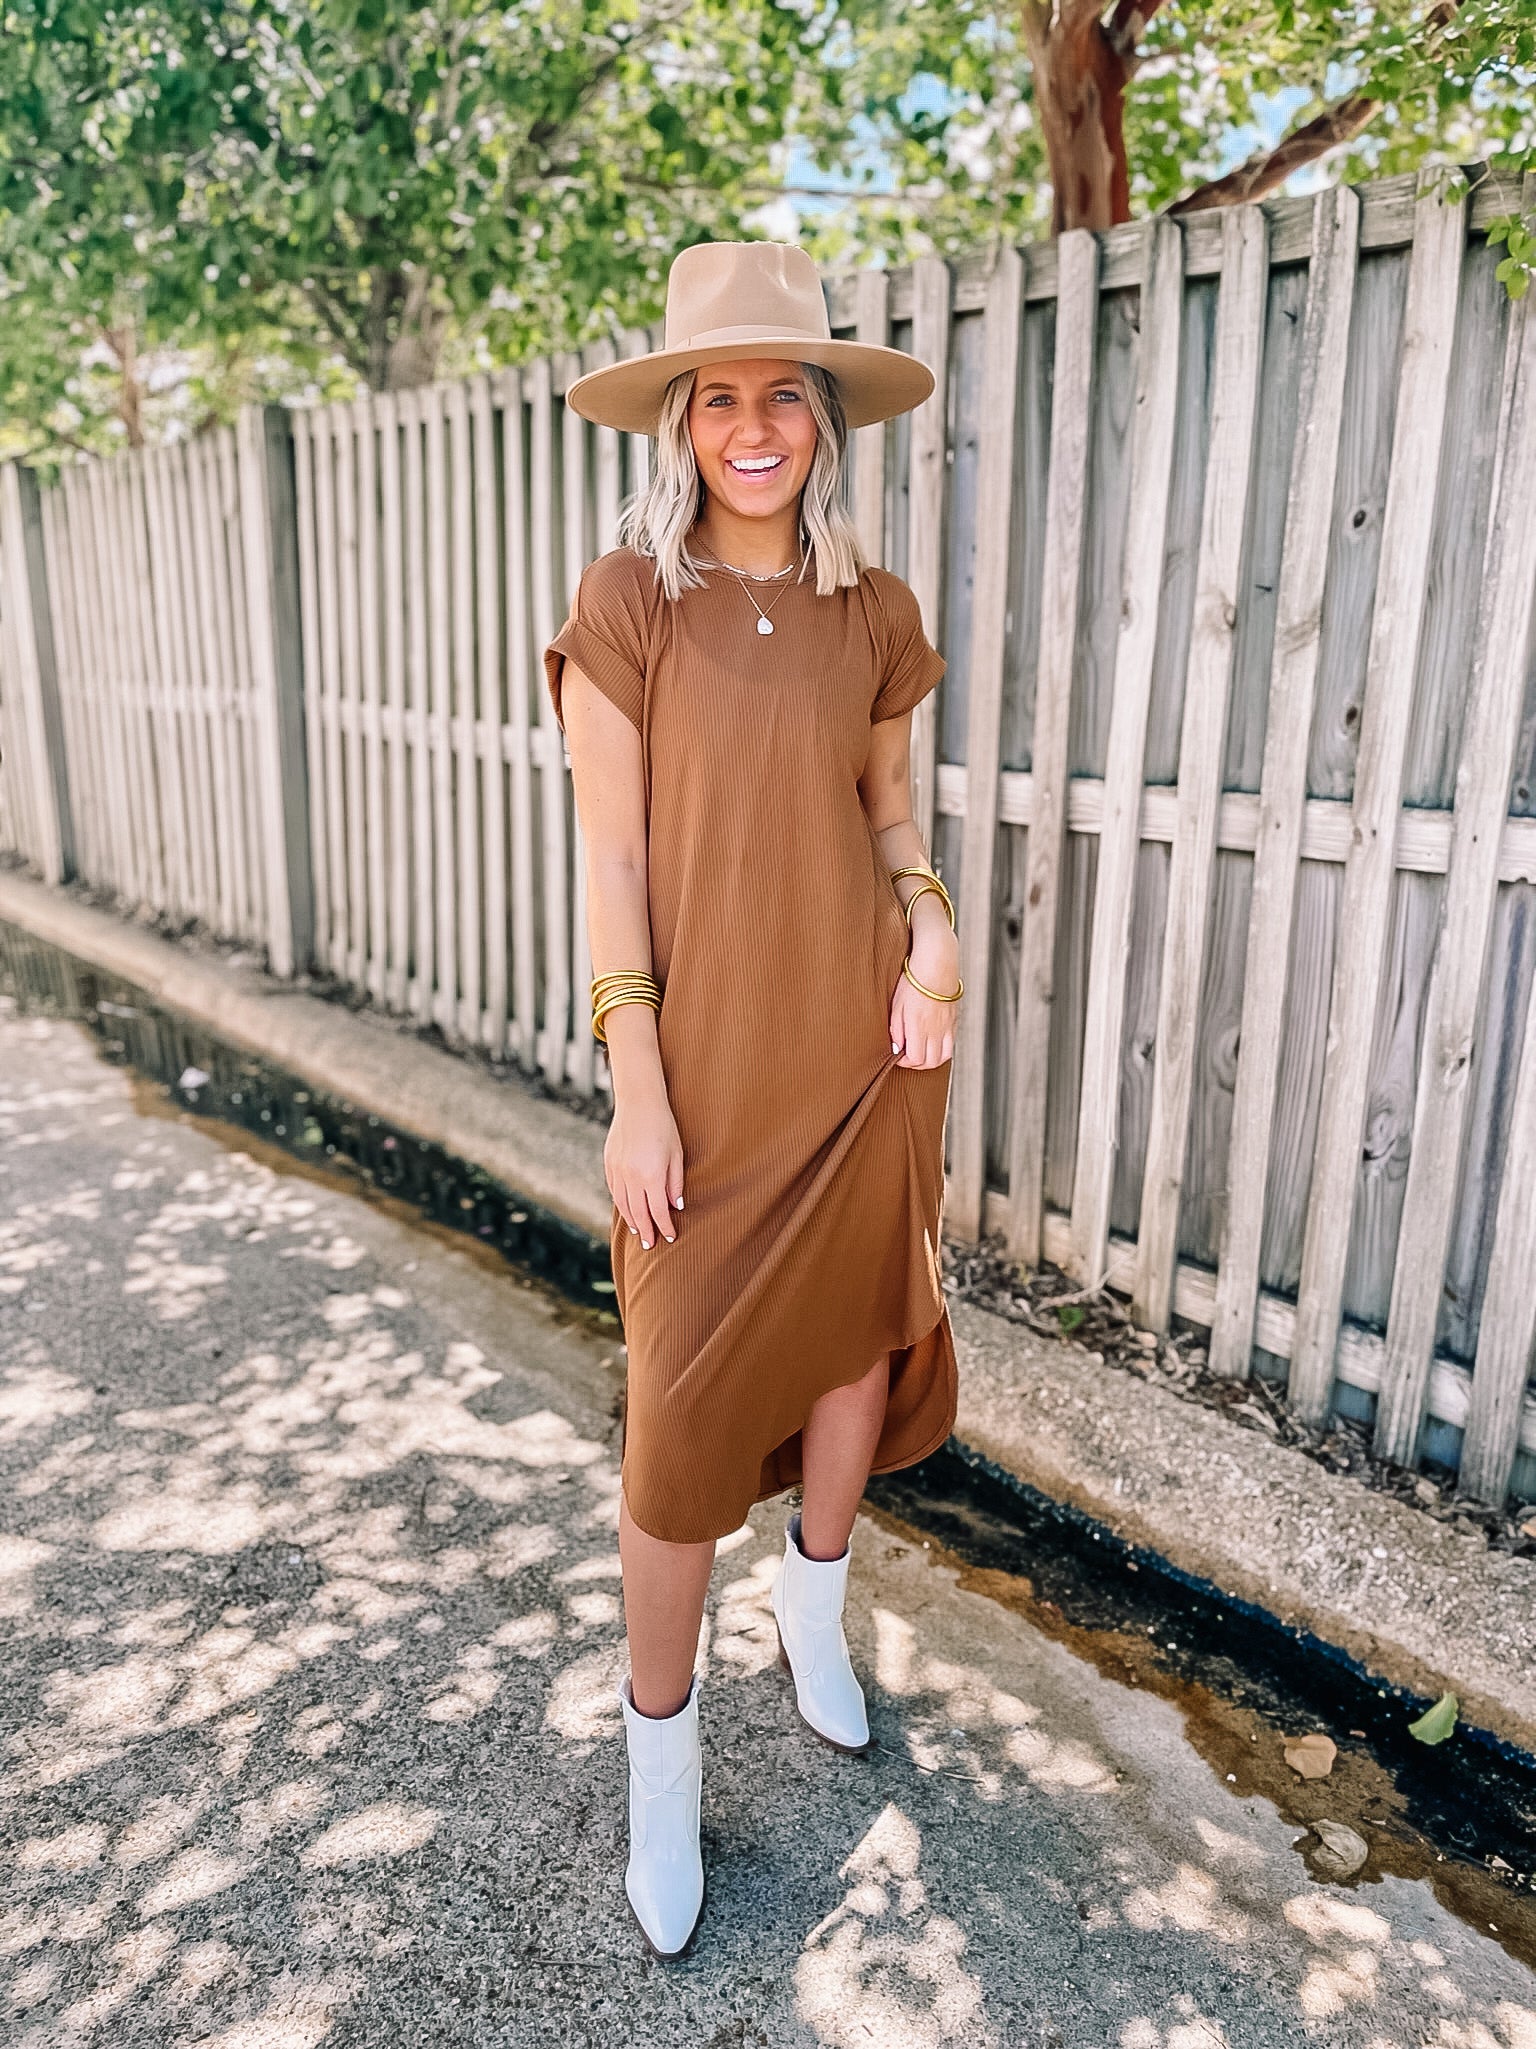 Chill Looks Short Sleeve Thin Ribbed Midi Dress in Caramel Brown - Giddy Up Glamour Boutique